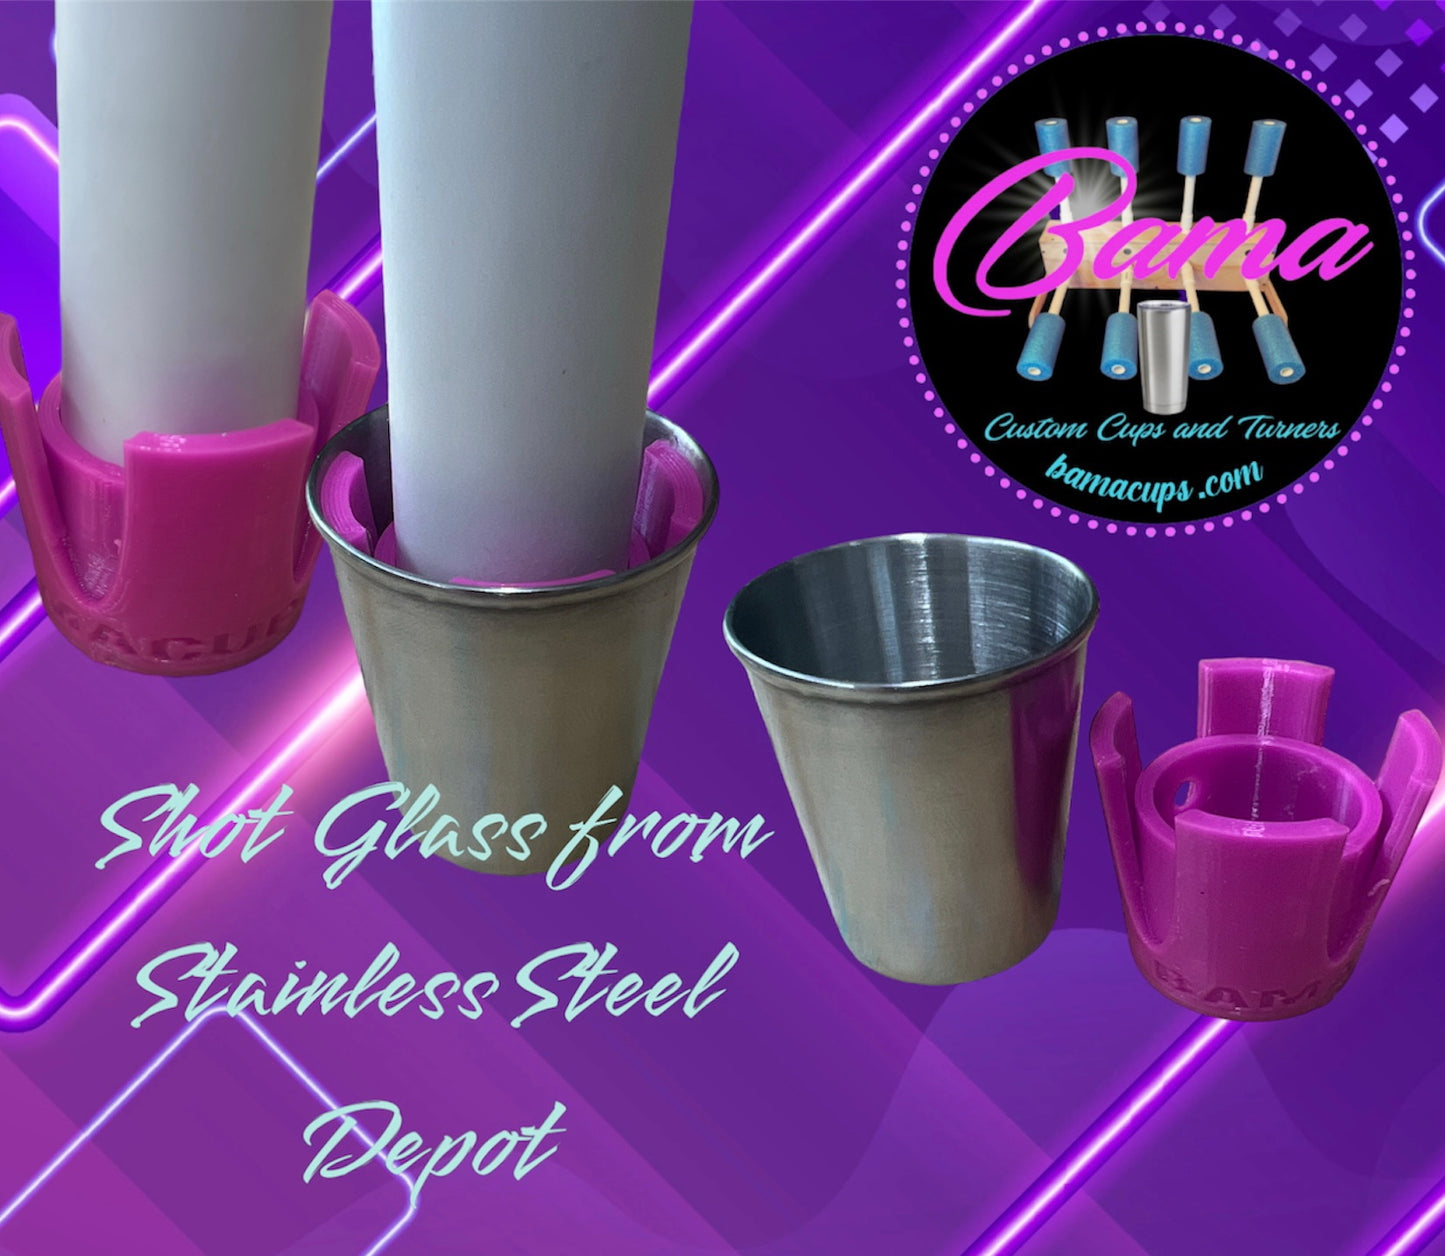 Shot Glass Adapter for Stainless Steel Shot Glass